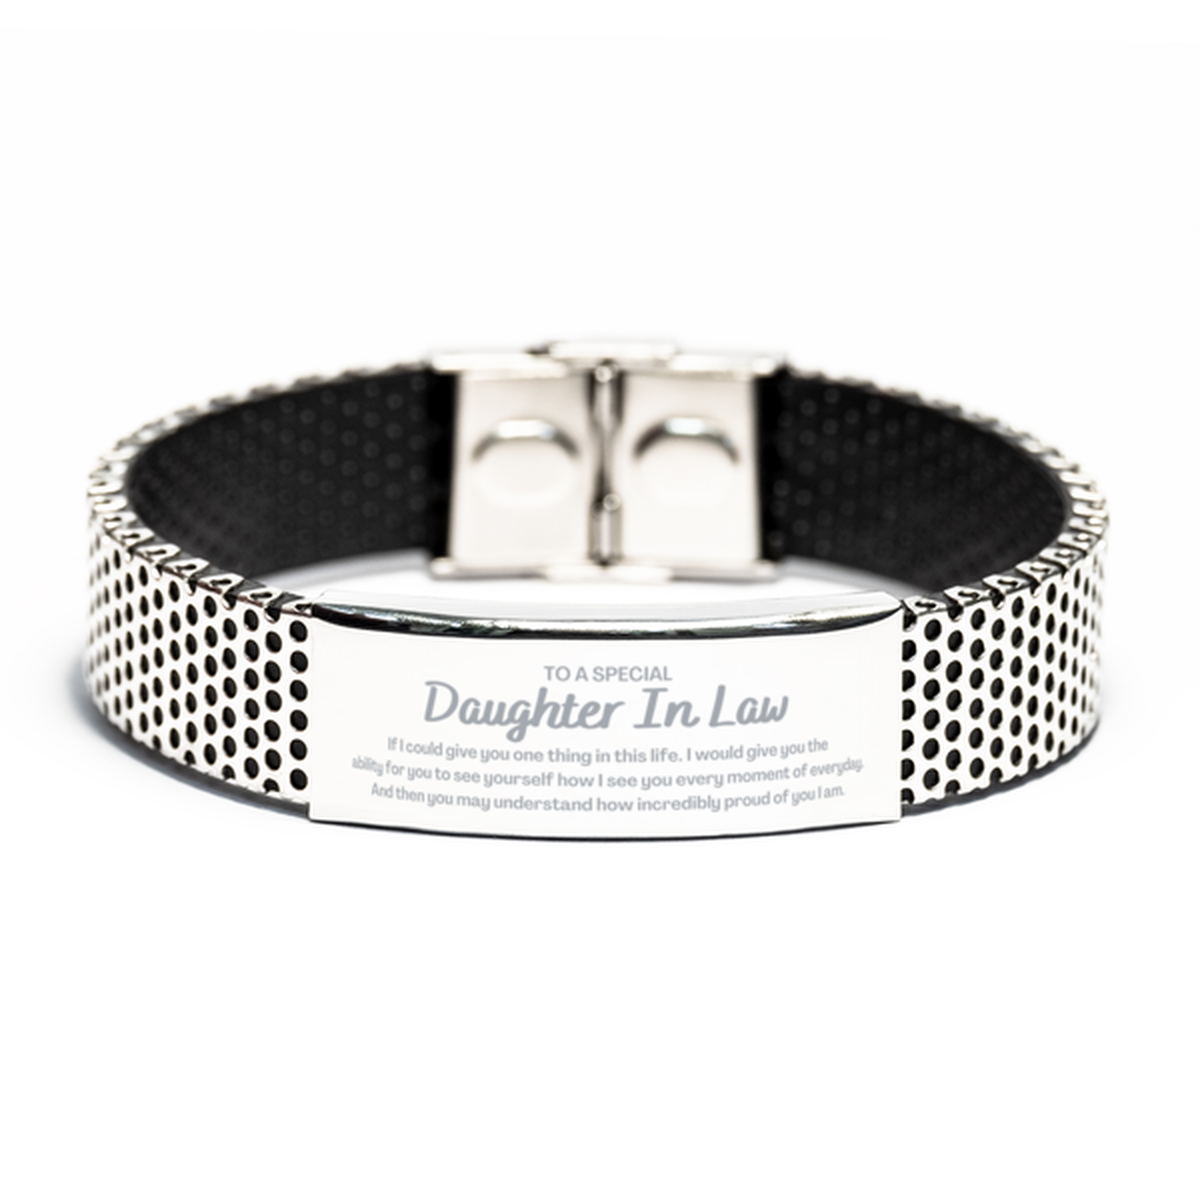 To My Daughter In Law Stainless Steel Bracelet, Gifts For Daughter In Law Engraved, Inspirational Gifts for Christmas Birthday, Epic Gifts for Daughter In Law To A Special Daughter In Law how incredibly proud of you I am